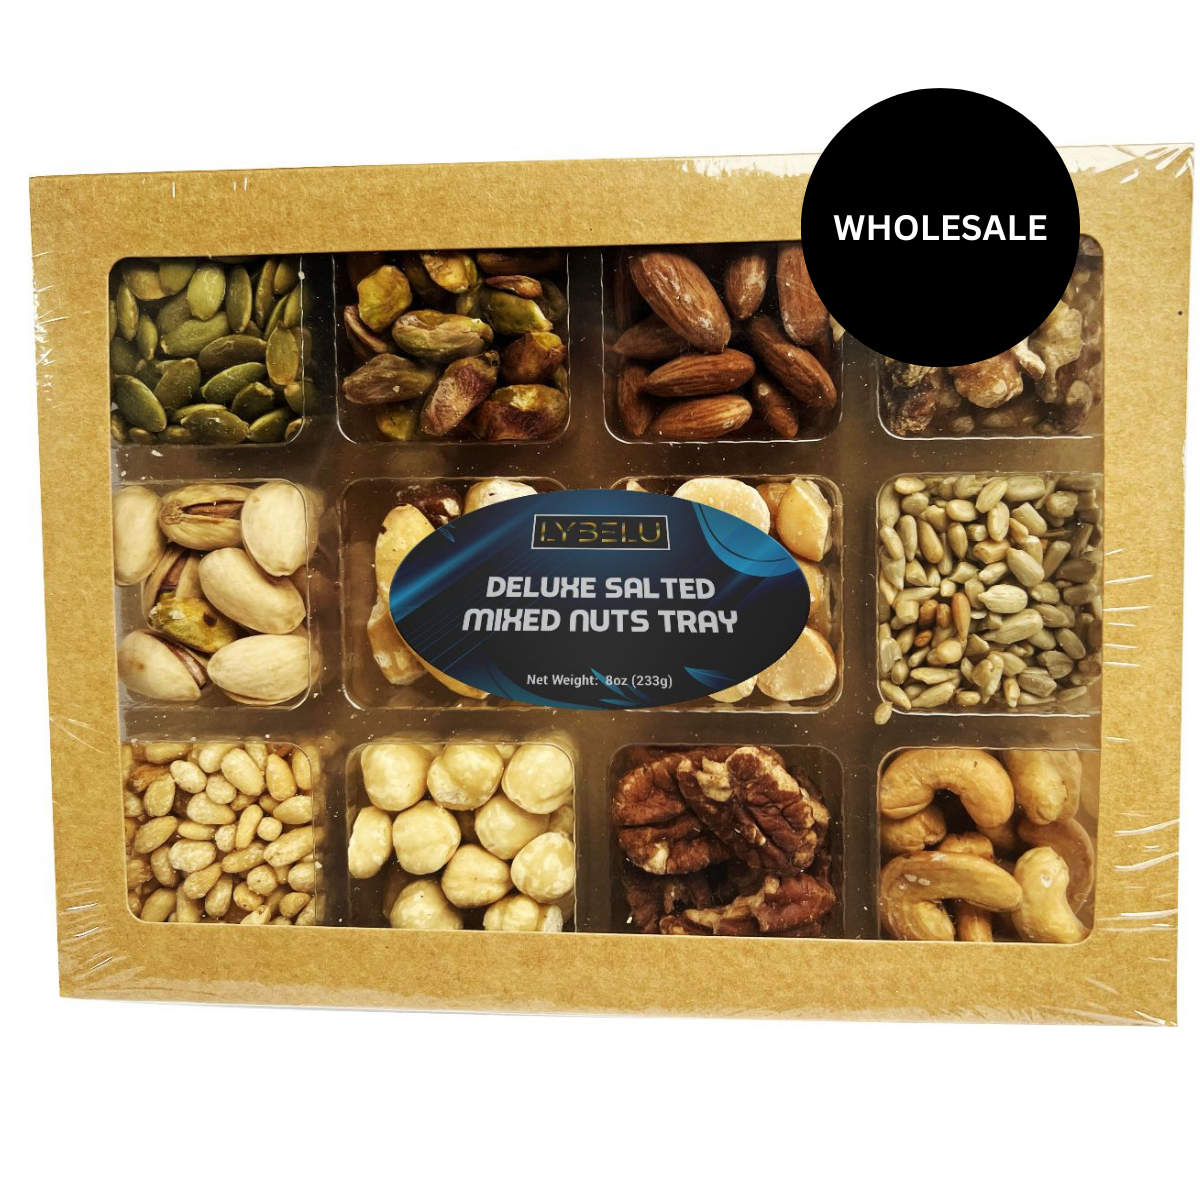 Deluxe Salted Mixed Nuts Tray 12 Cavity – 8oz